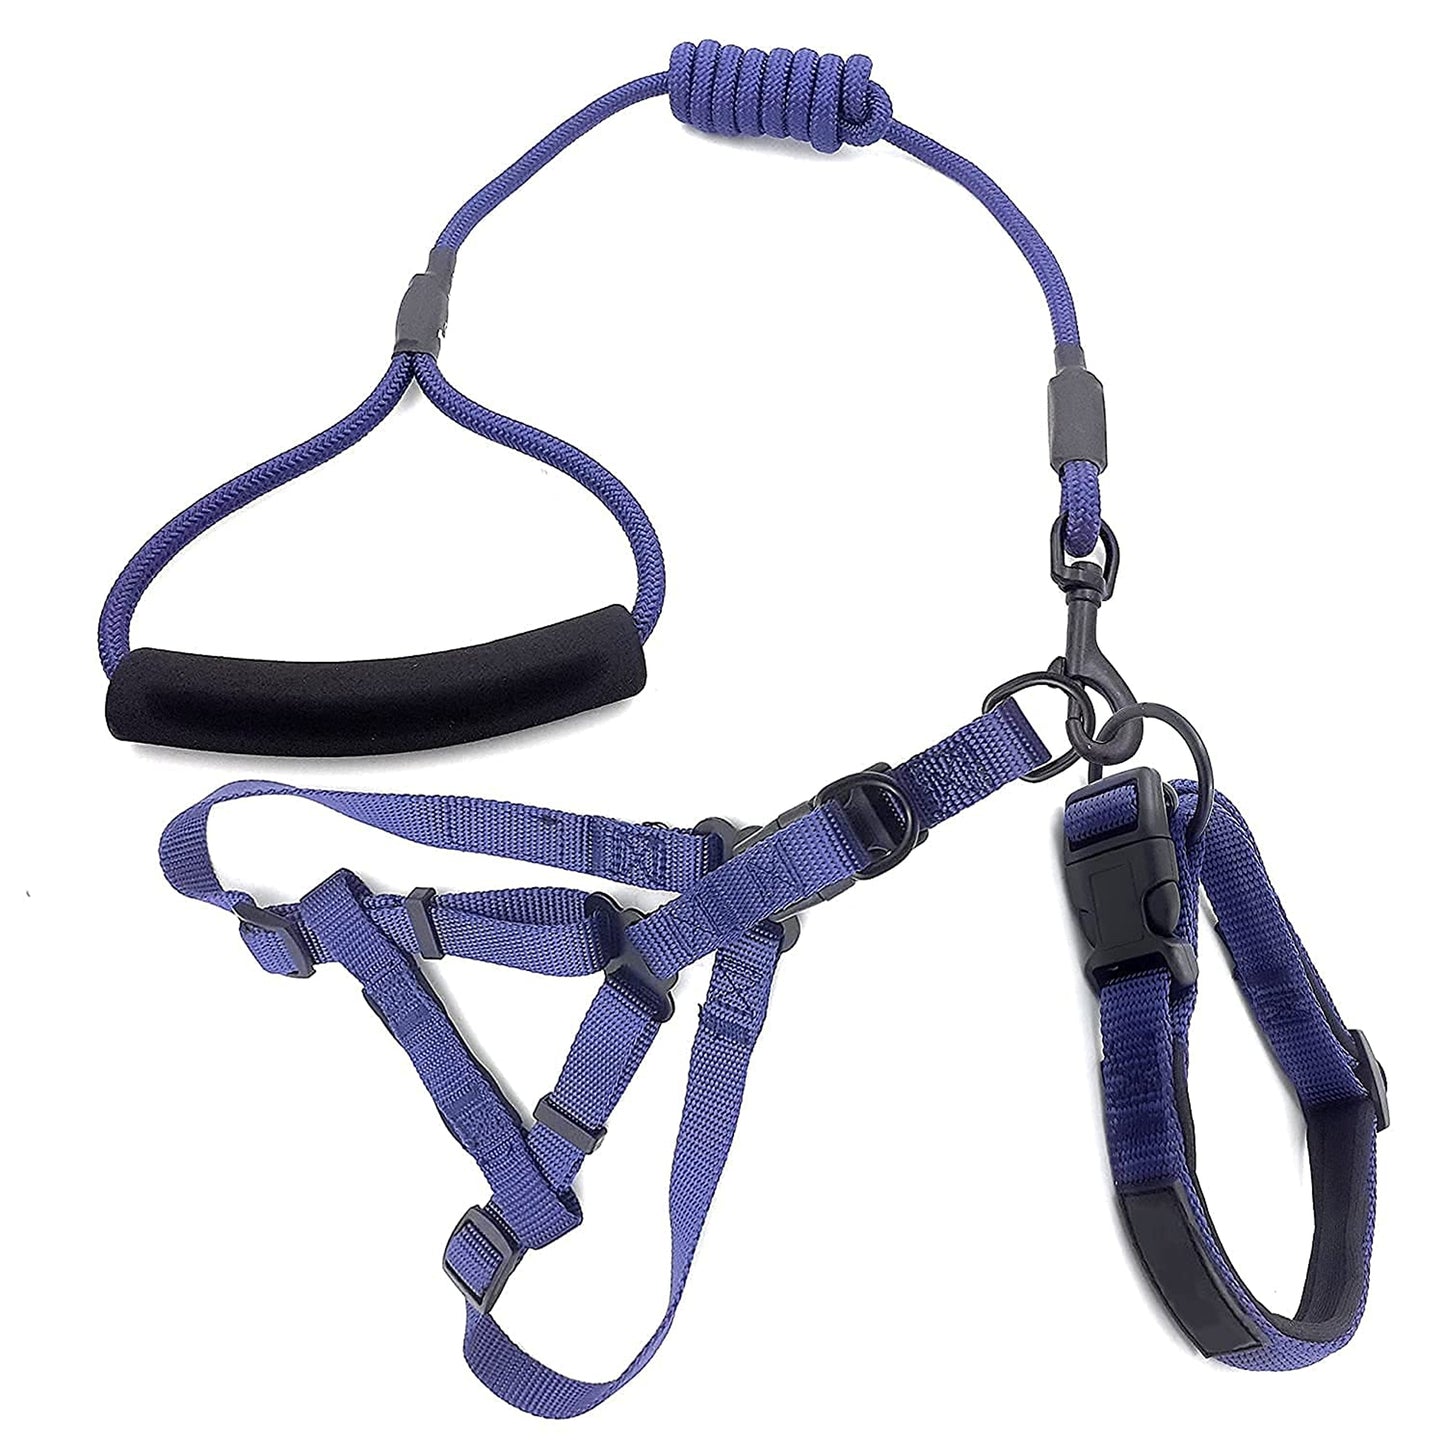 Smarty Pet Combo Pack Of Harness, Neck Collar Belts And Rope Set (Color May Vary)